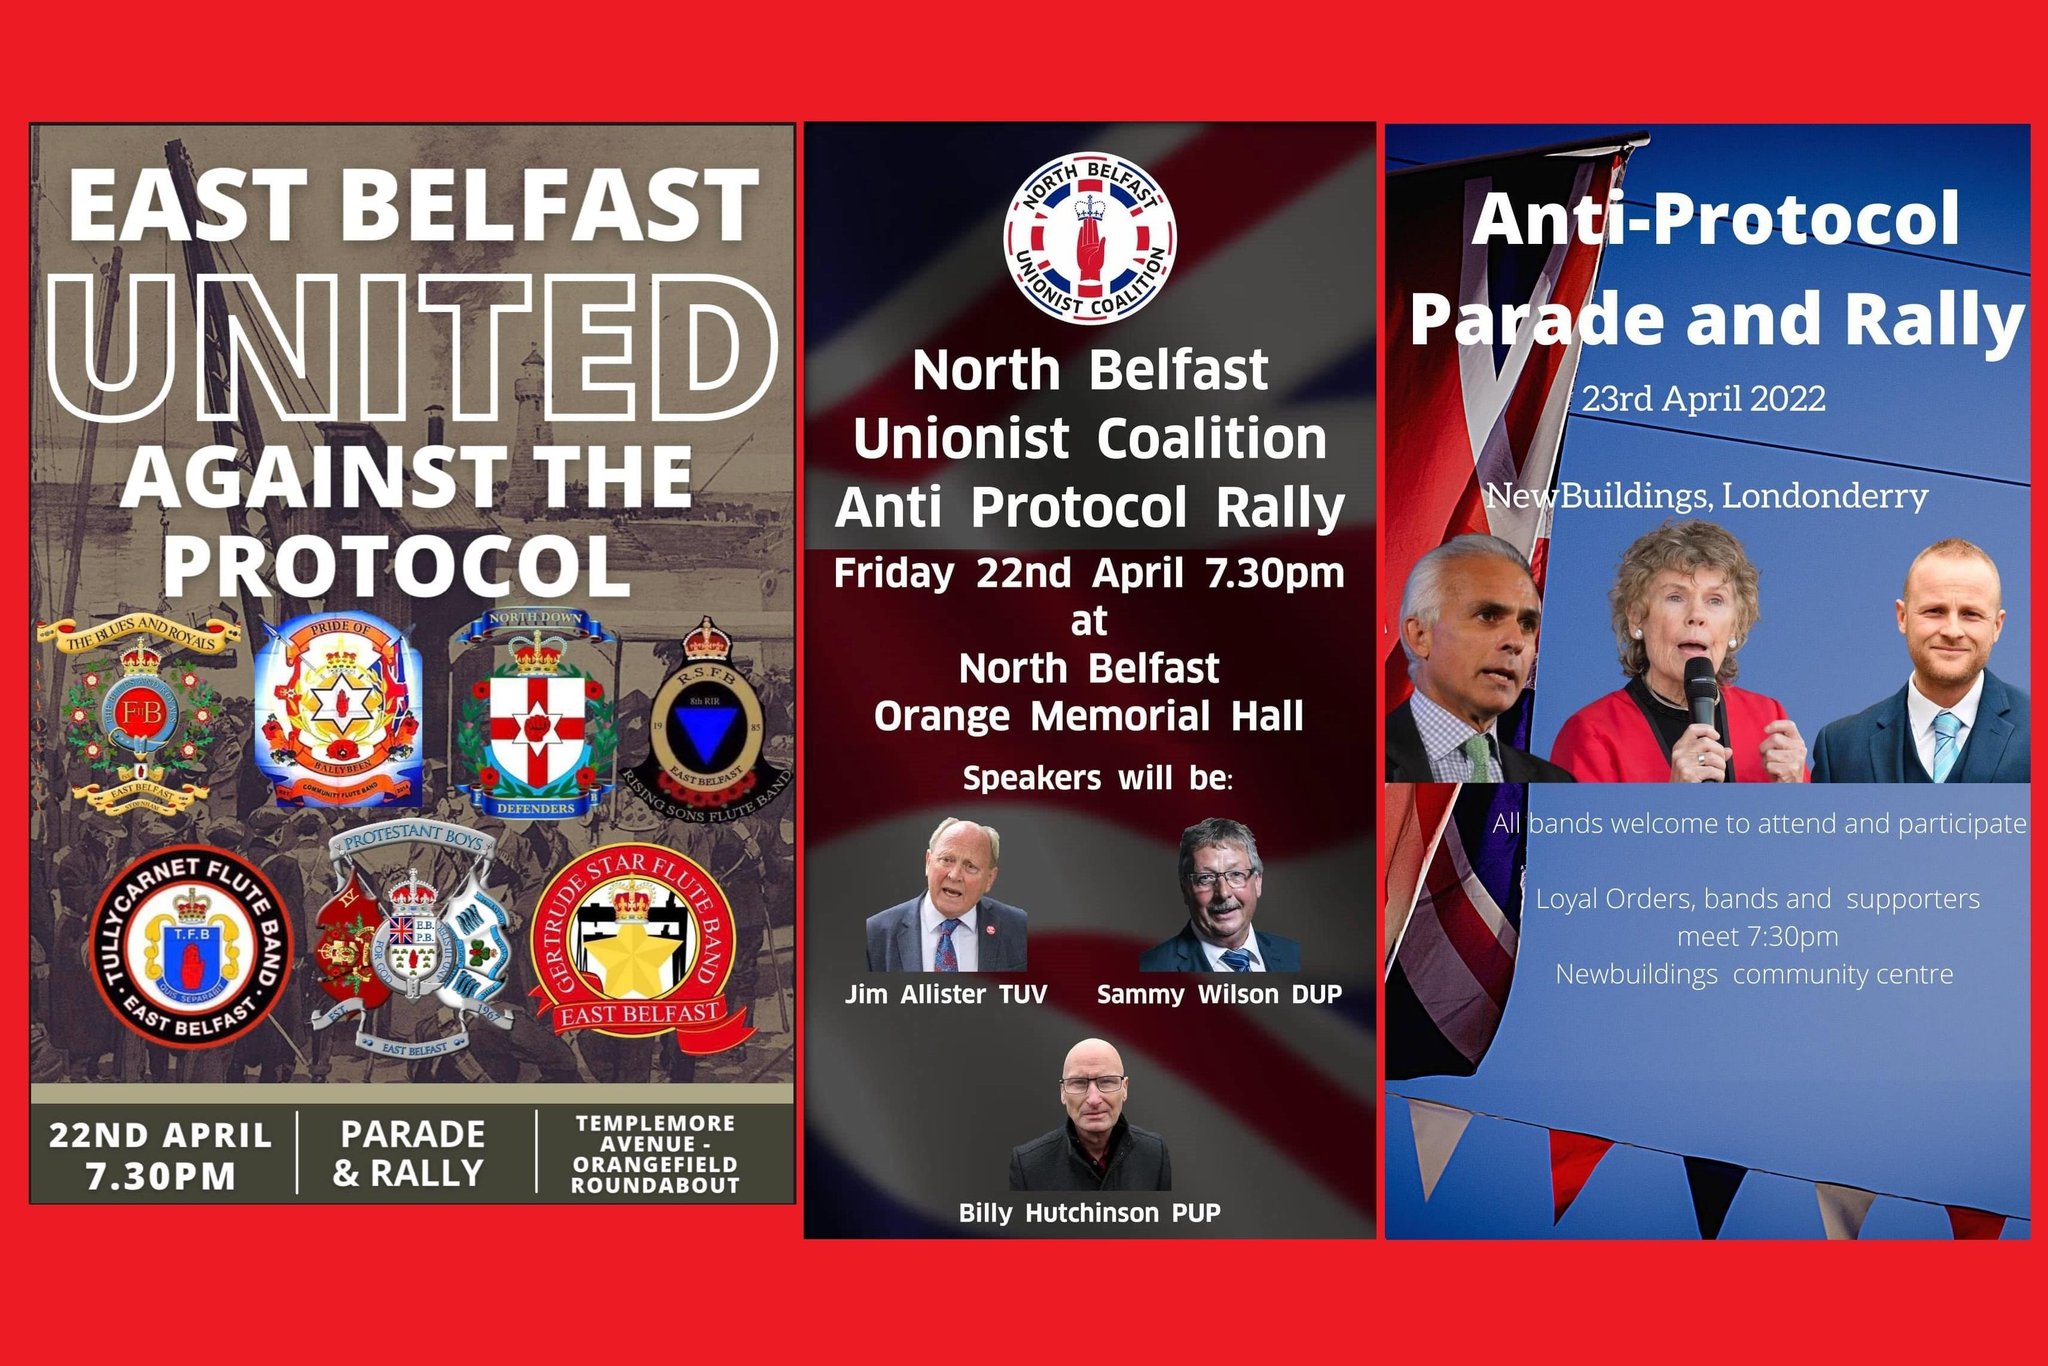 UPDATED: All upcoming anti-Protocol parades and rallies across Northern Ireland